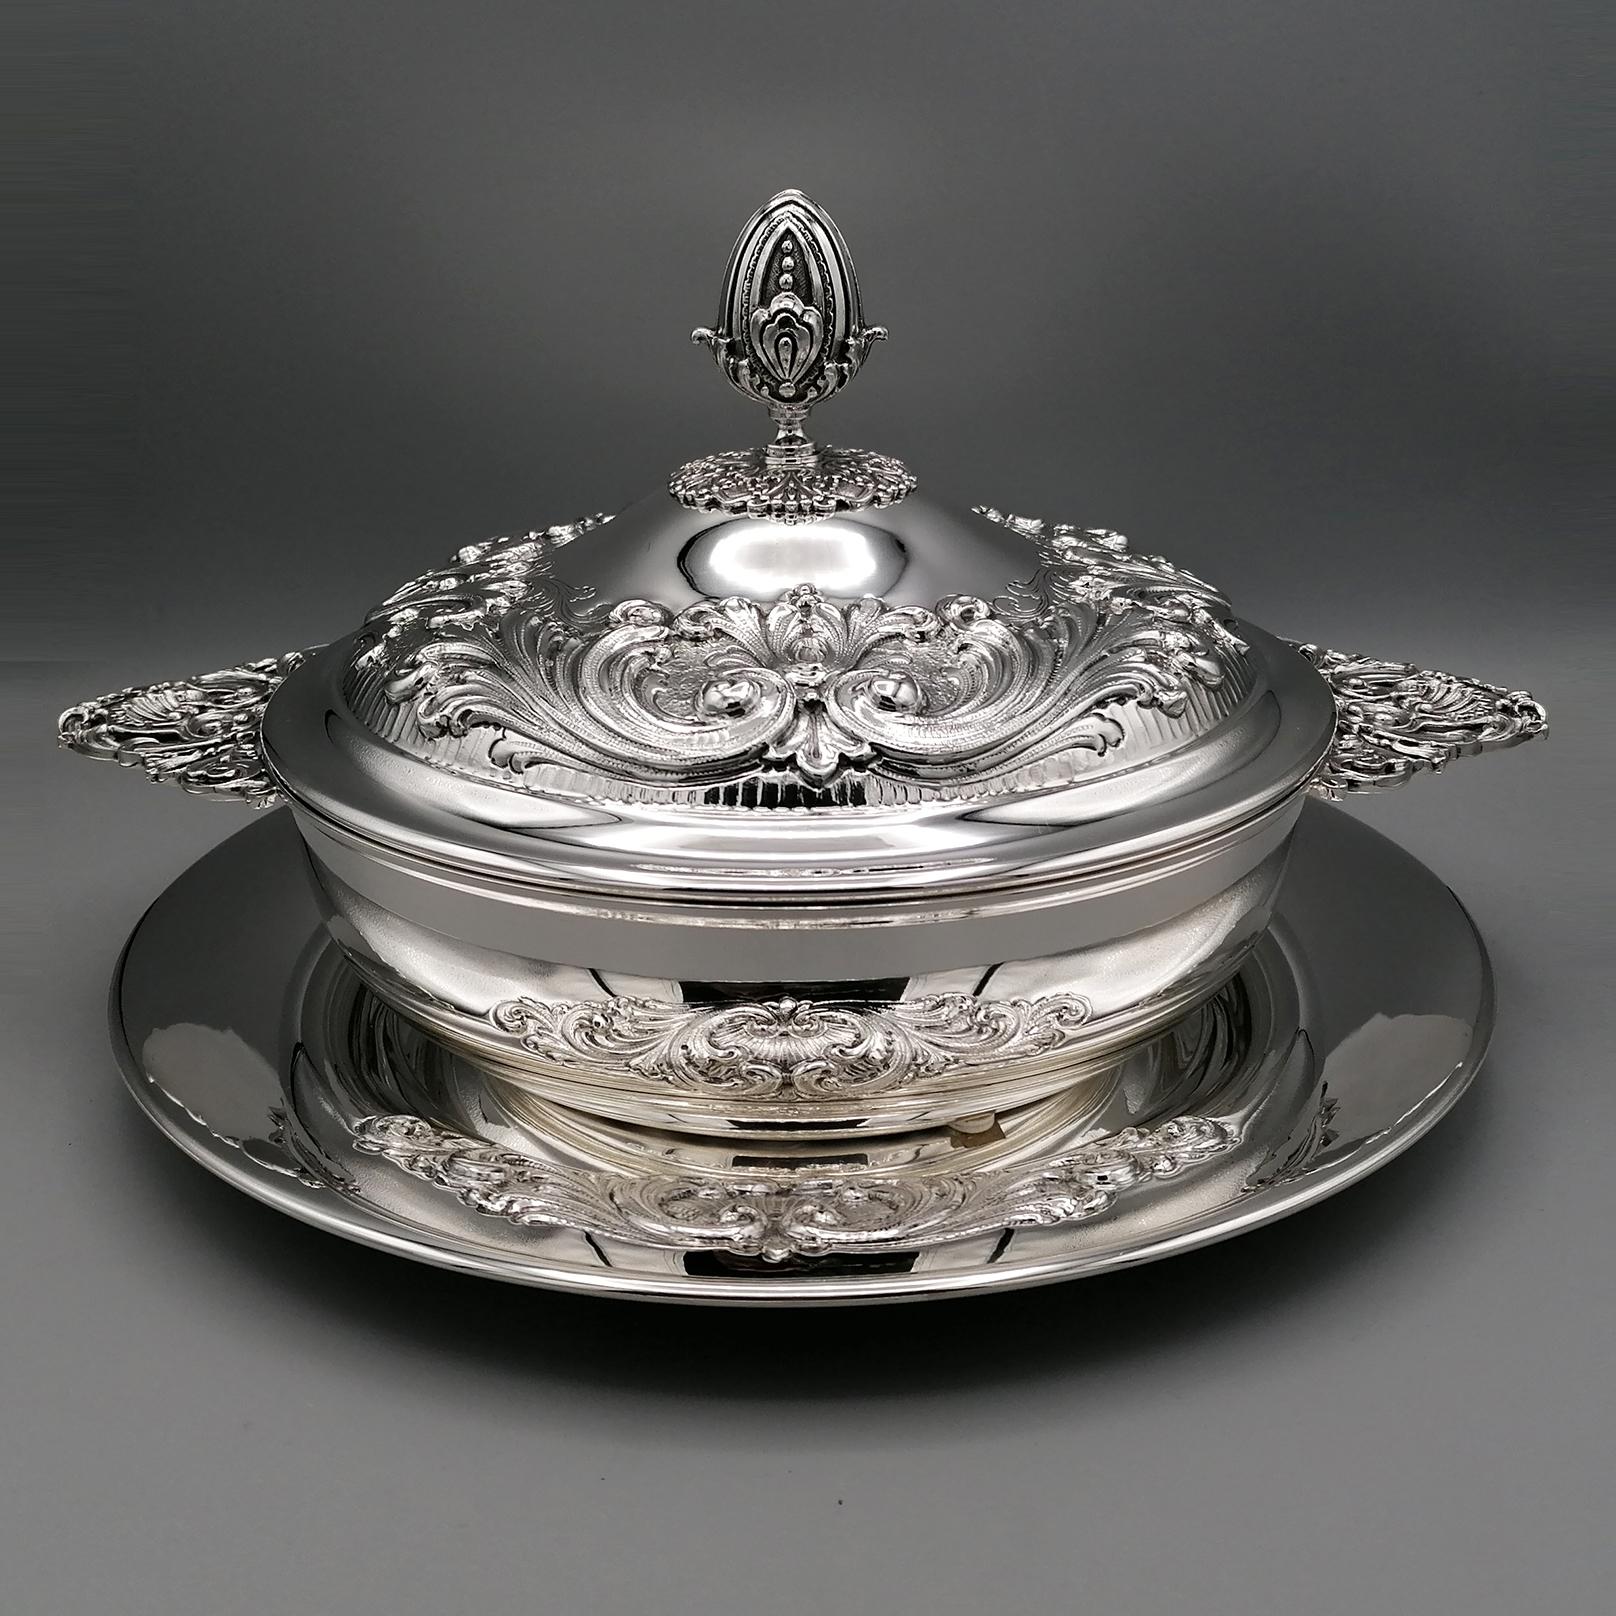 Tureen in sterling silver in Baroque style.
The dish measures 31cm in diameter and was left smooth with the brim raised.
On the plate, scrolls and shells typical of the Italian Baroque style have been embossed and chiseled by hand in a symmetrical